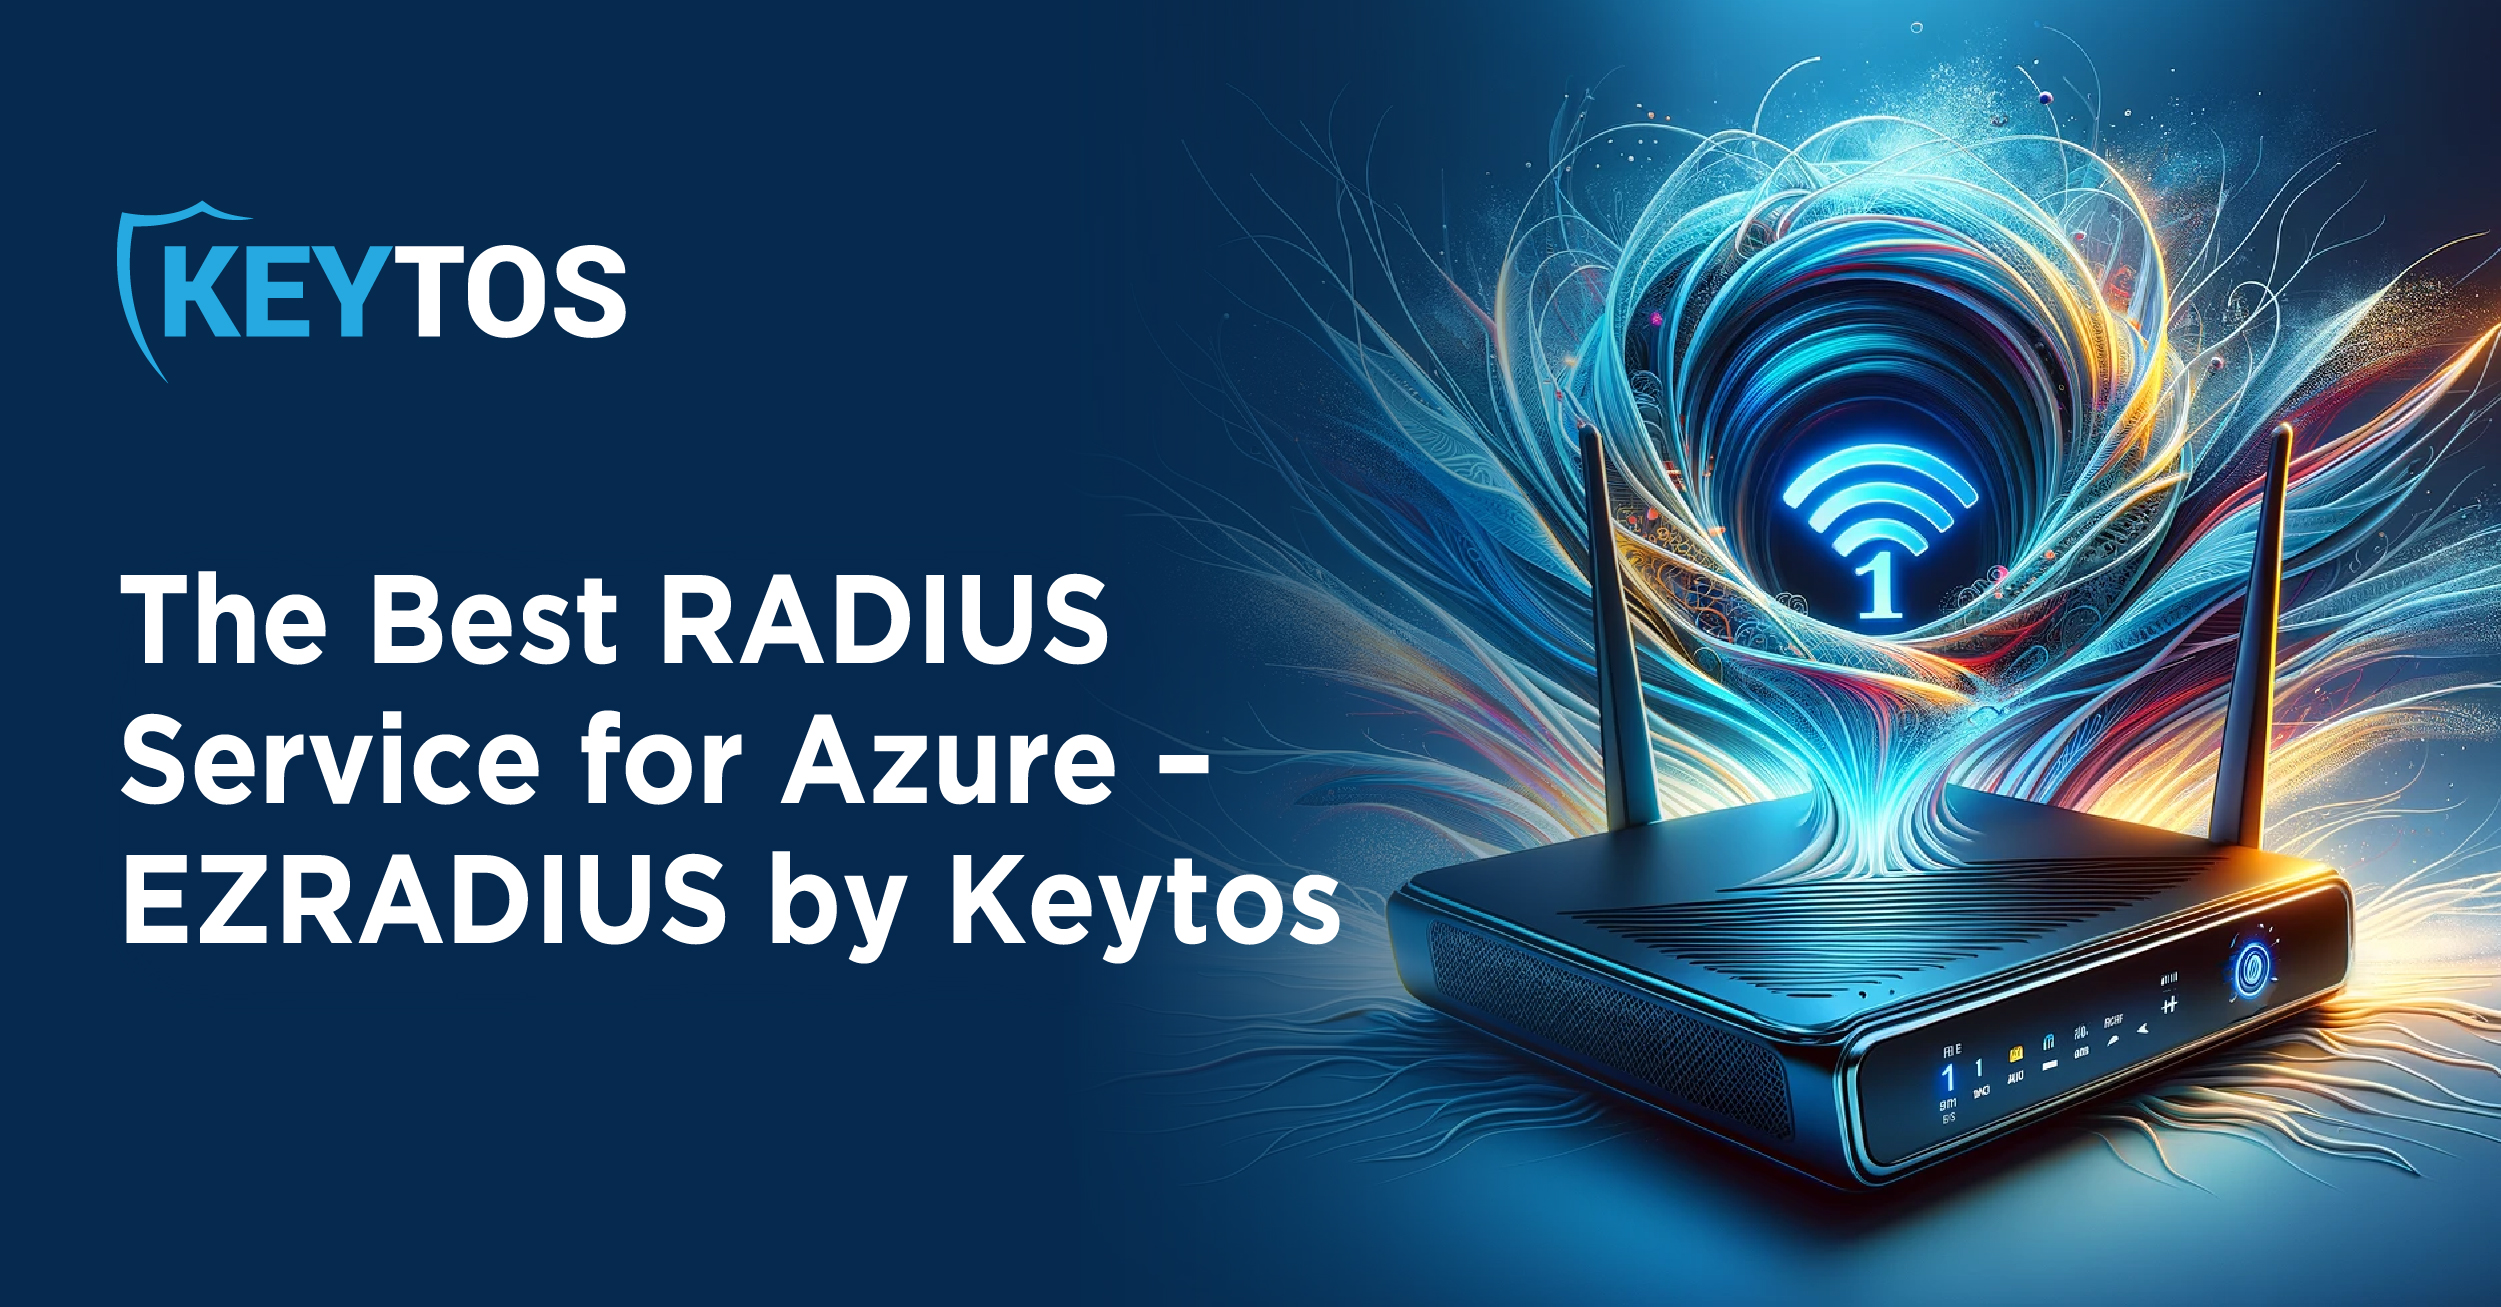 Radius as a Service for Azure